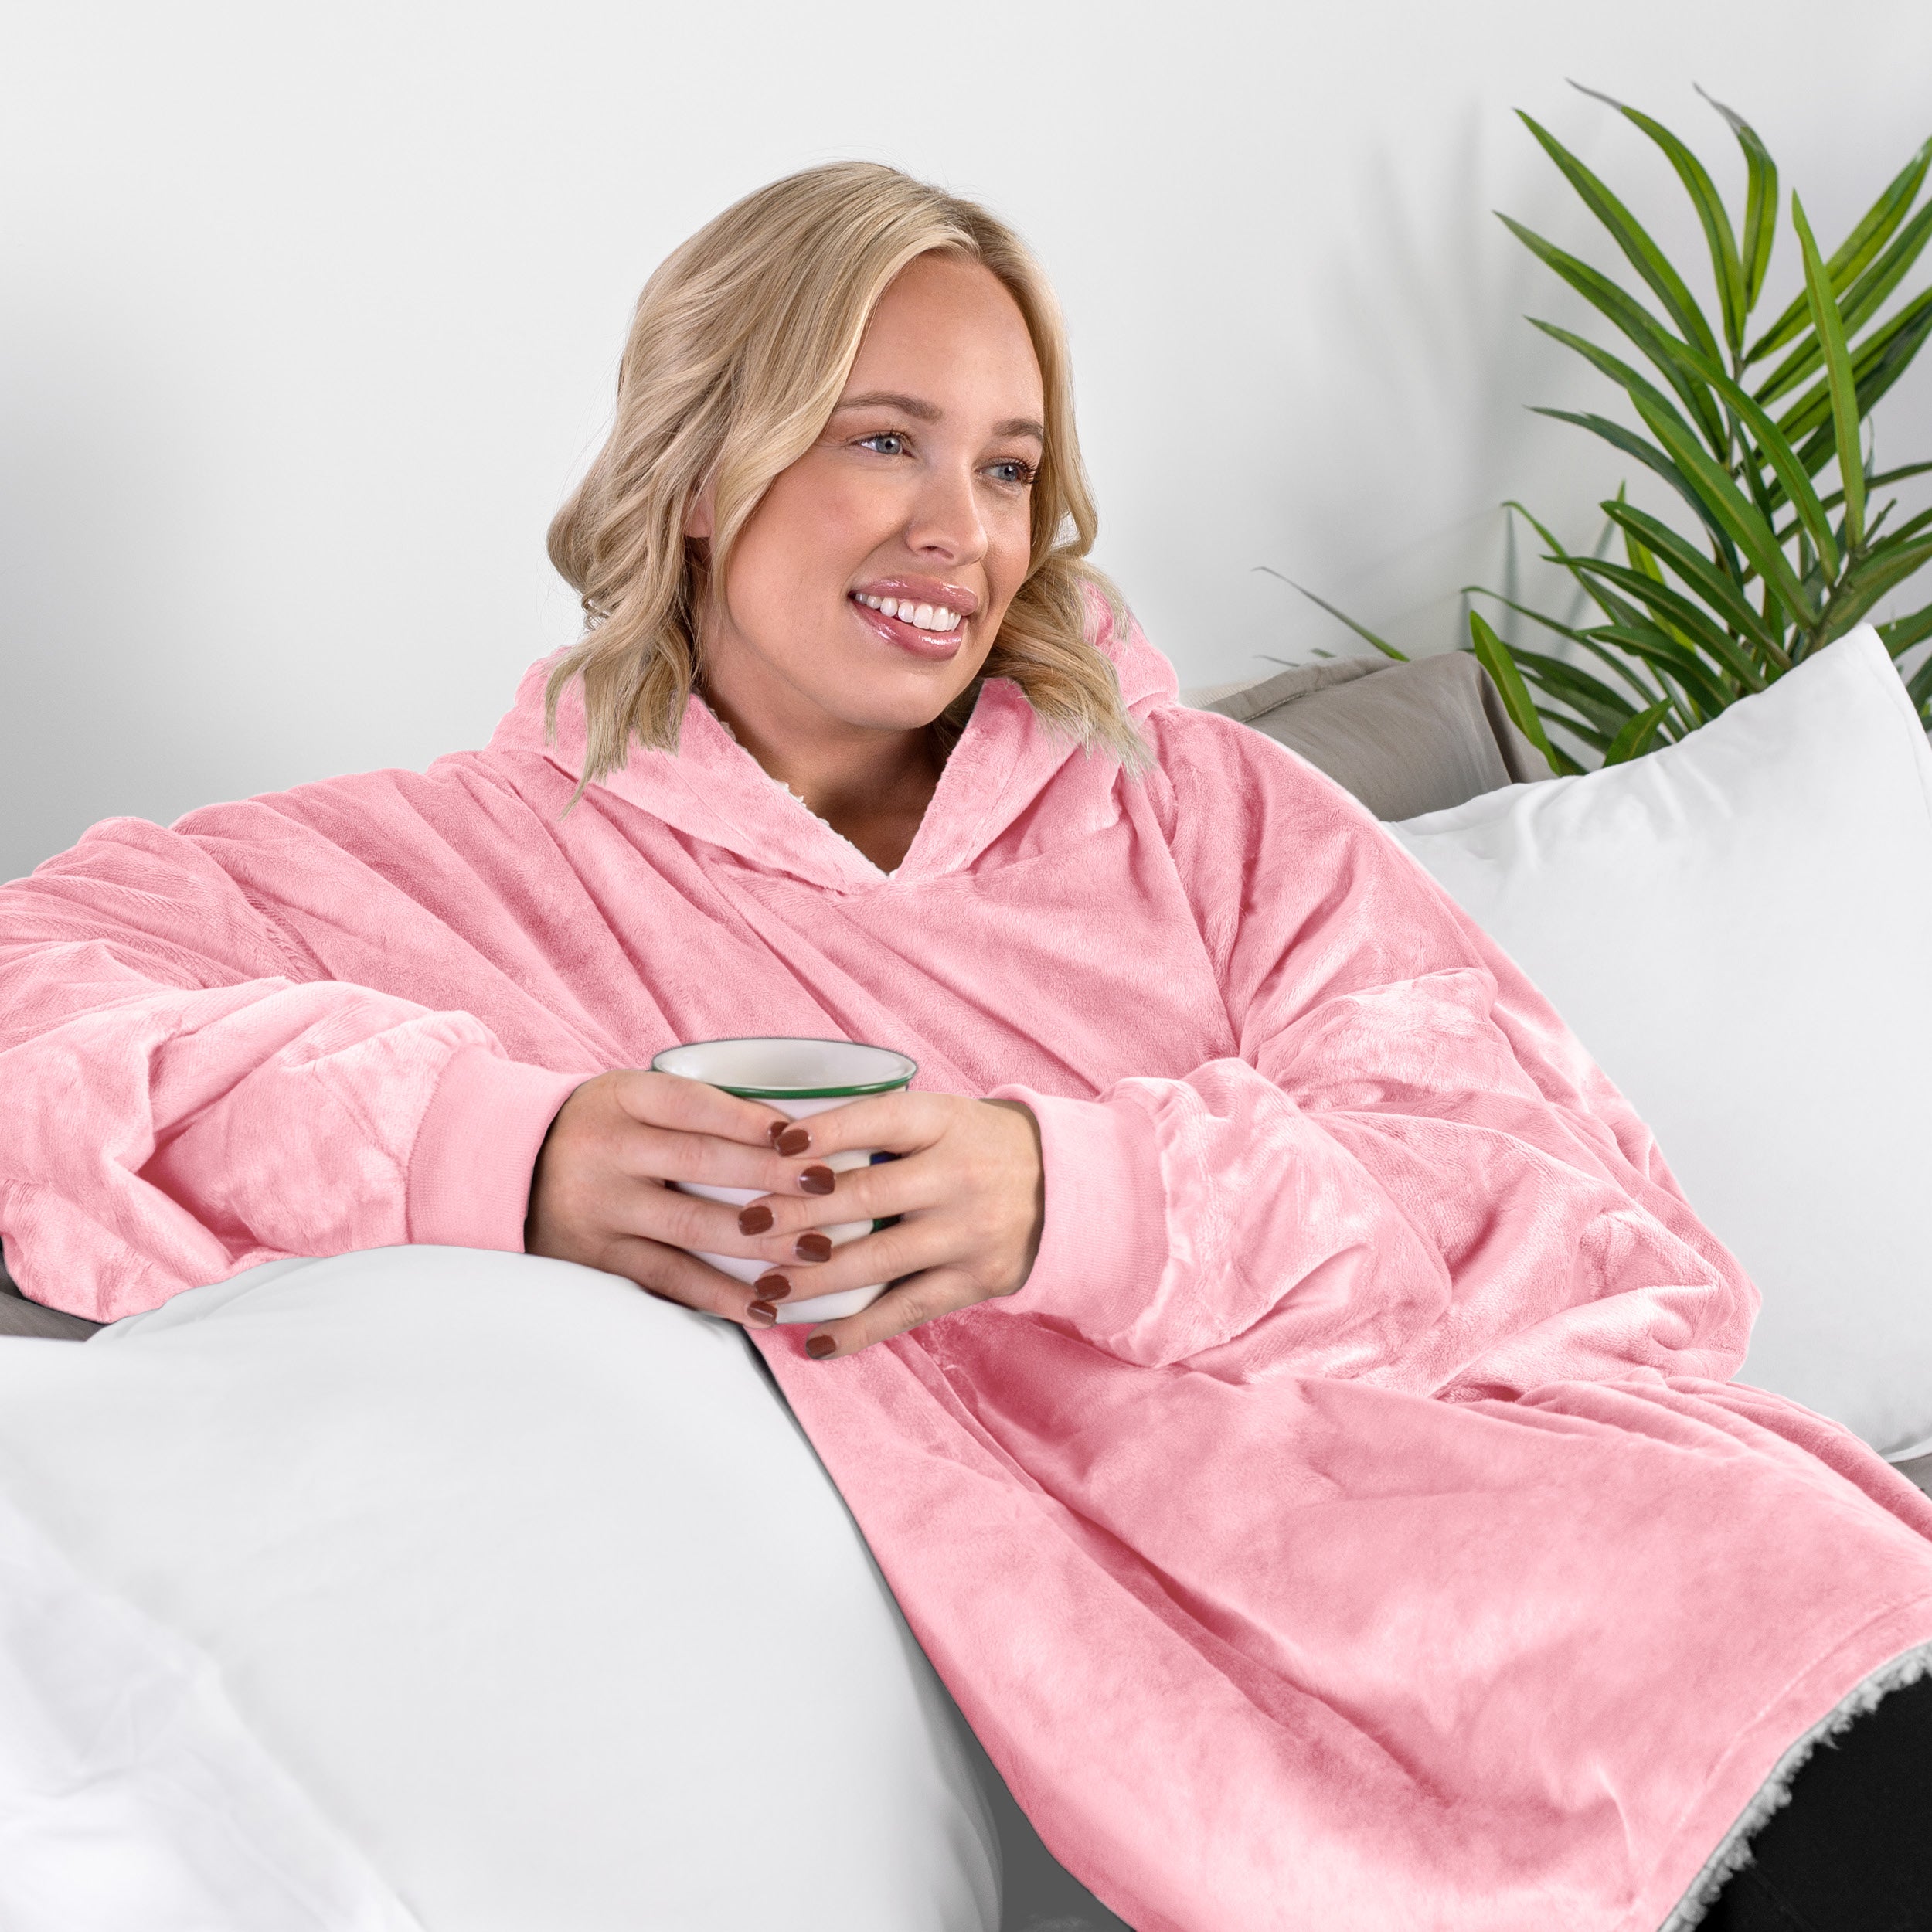 A woman sitting on a couch holding a mug wearing a sherpa blanket.